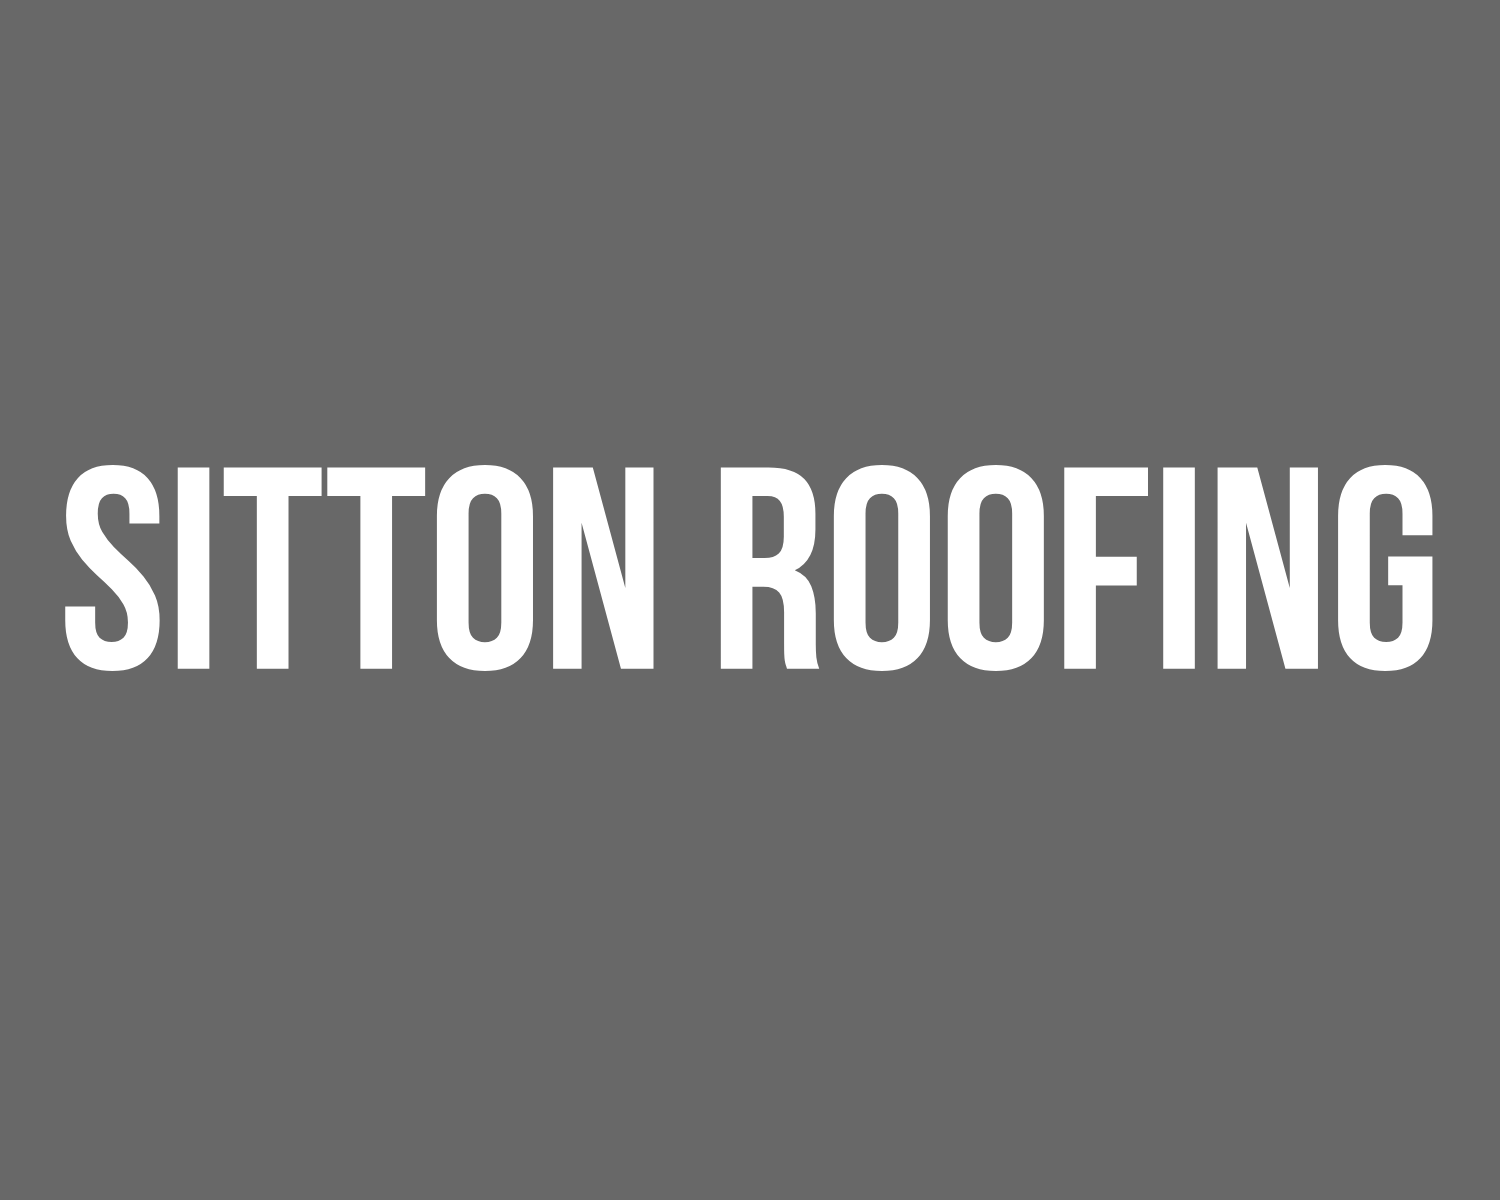 Sitton Roofing Co.